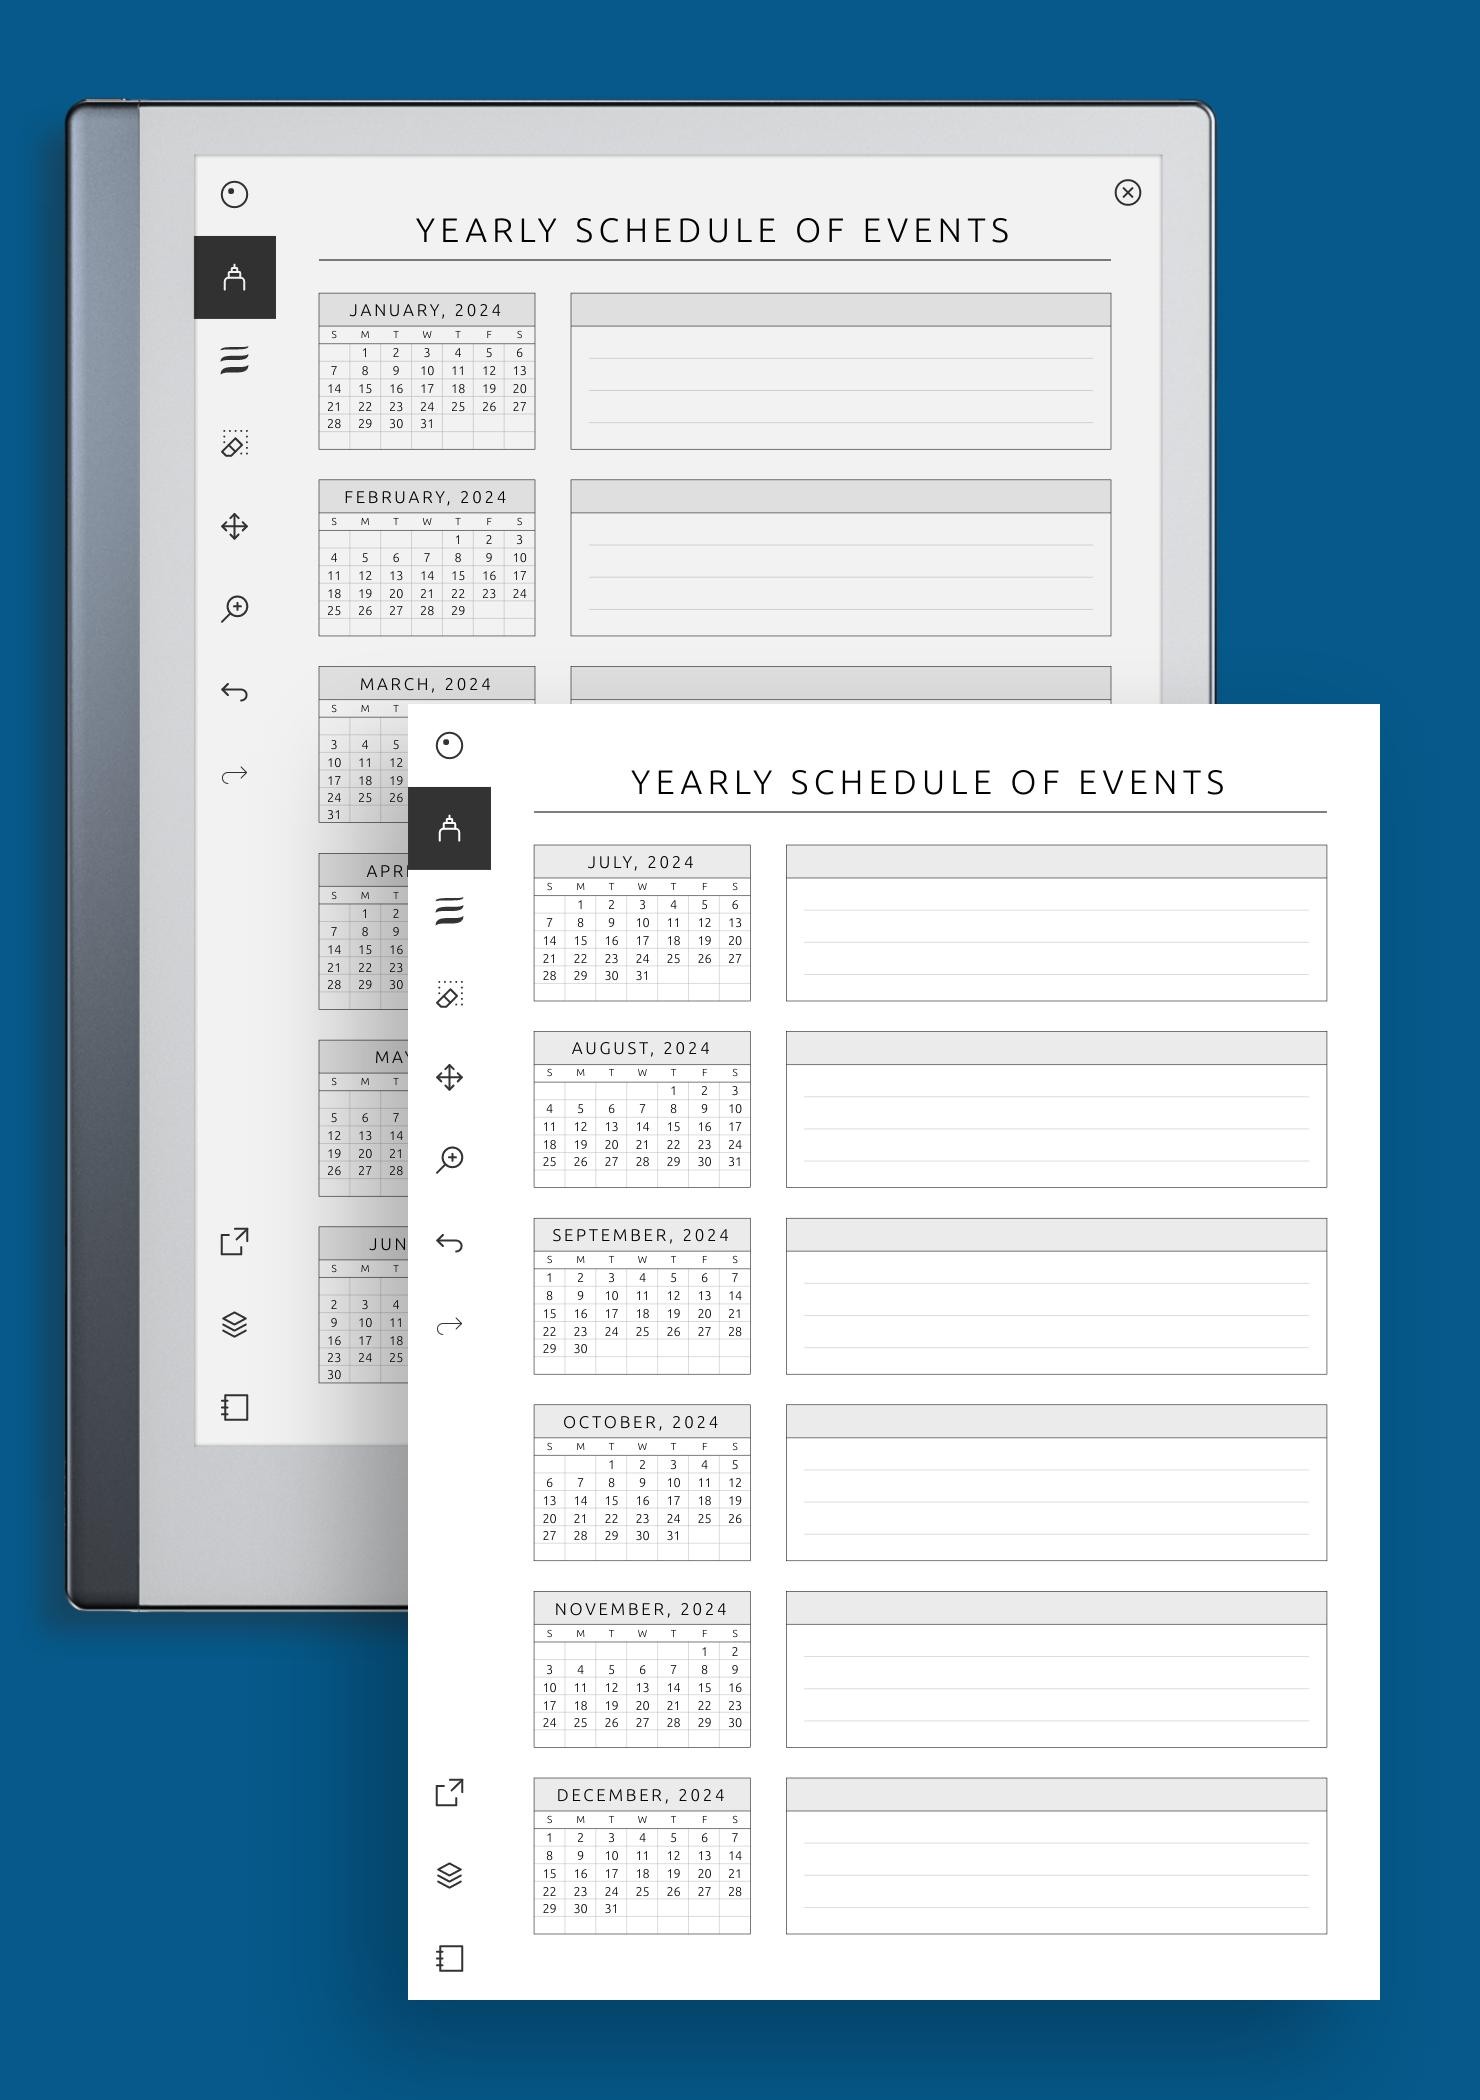 Download Printable Yearly Schedule of Events Template PDF